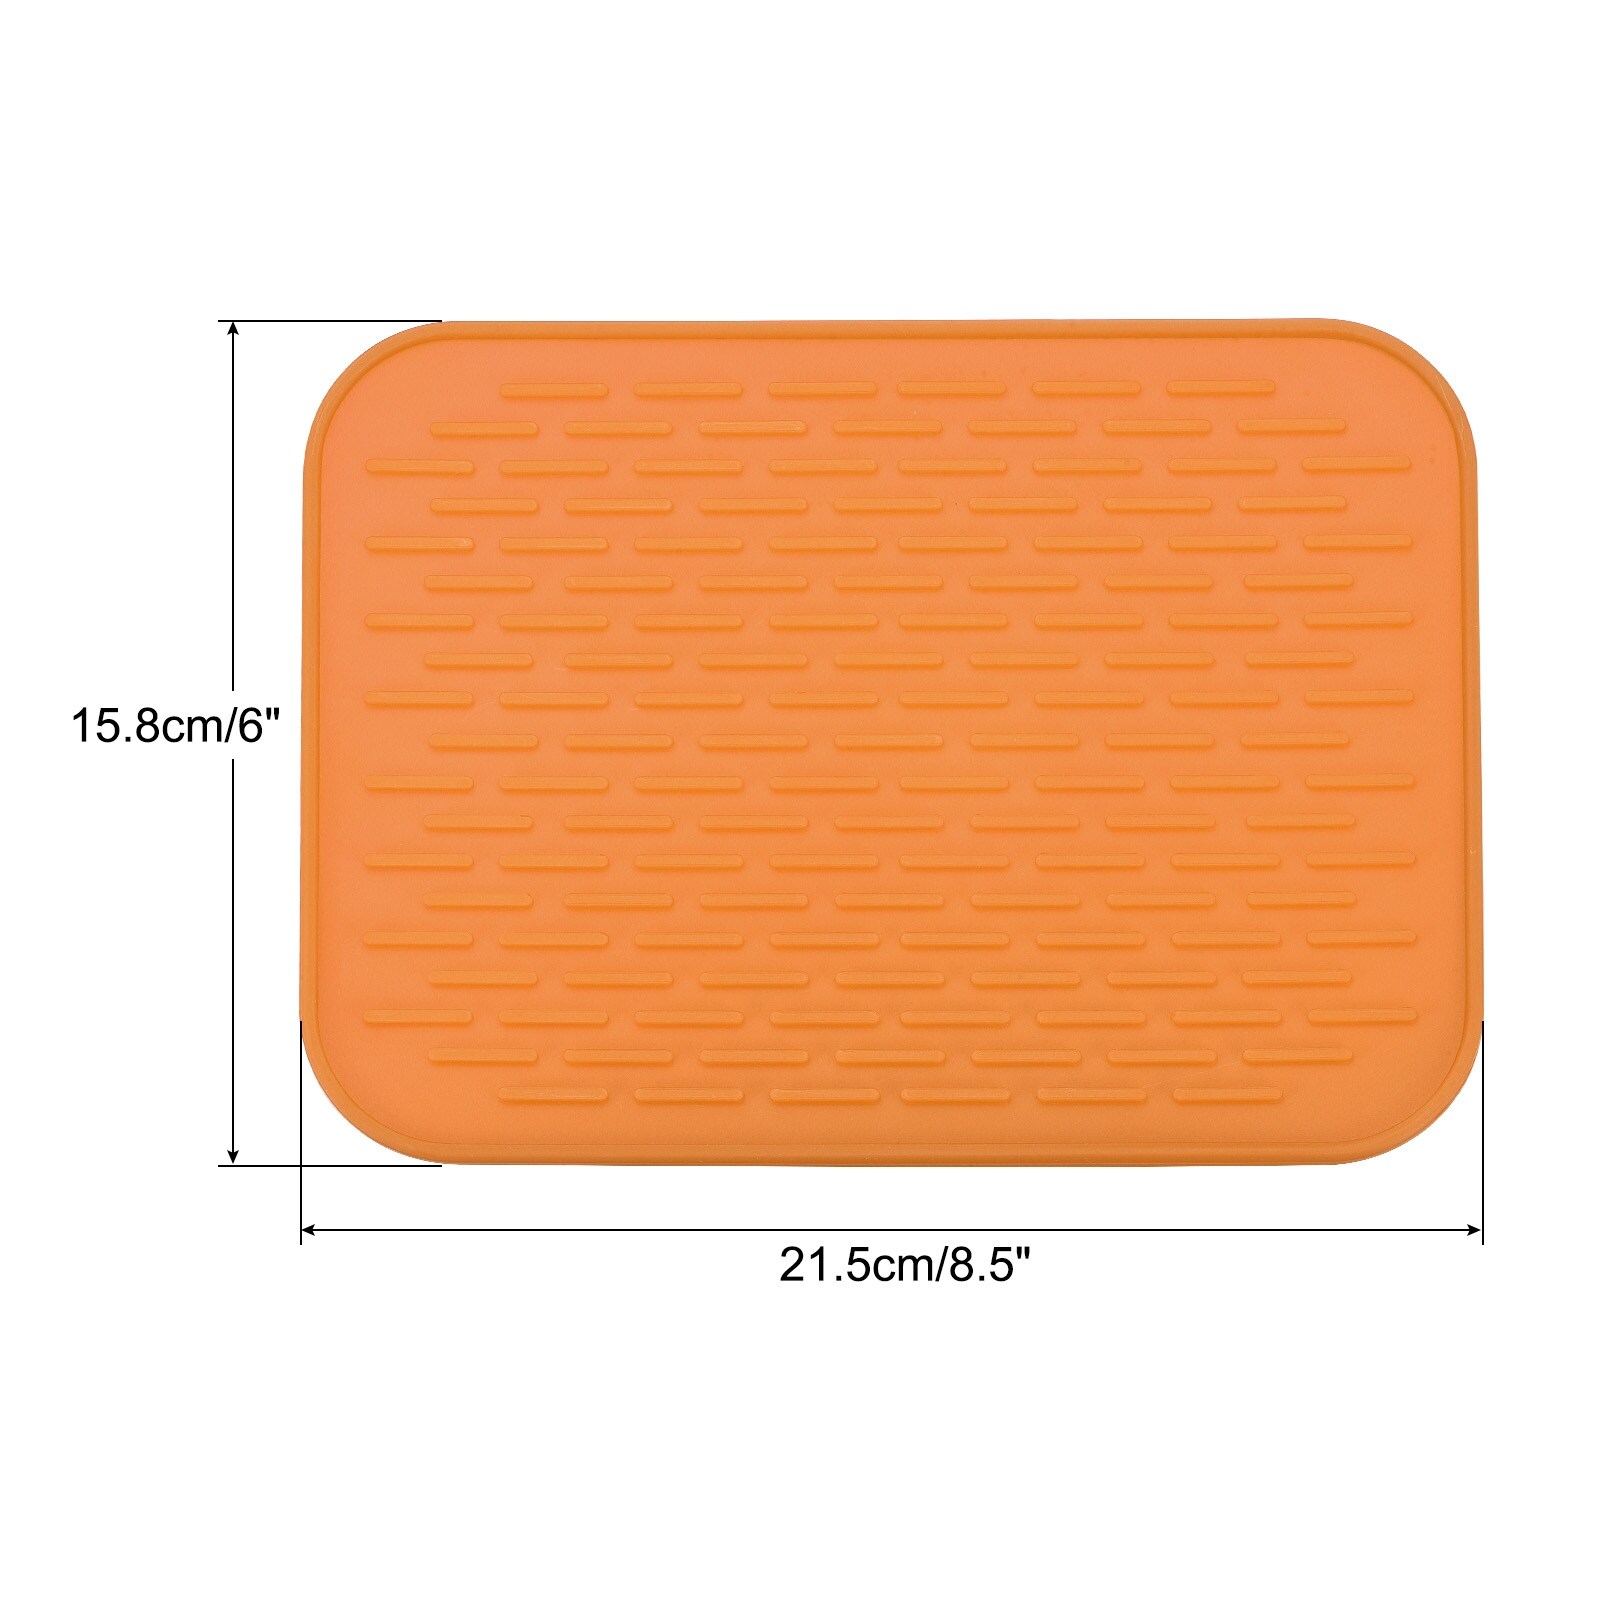 https://ak1.ostkcdn.com/images/products/is/images/direct/48380883bef30168872e4c4df18ddf81ae923bce/Silicone-Dish-Drying-Mat%2C-Under-Sink-Drain-Pad-Heat-Resistant-Non-Slipping-Suitable-for-Kitchen-Counter%2C-Sink%2C-Fridge%2C-Drawer.jpg